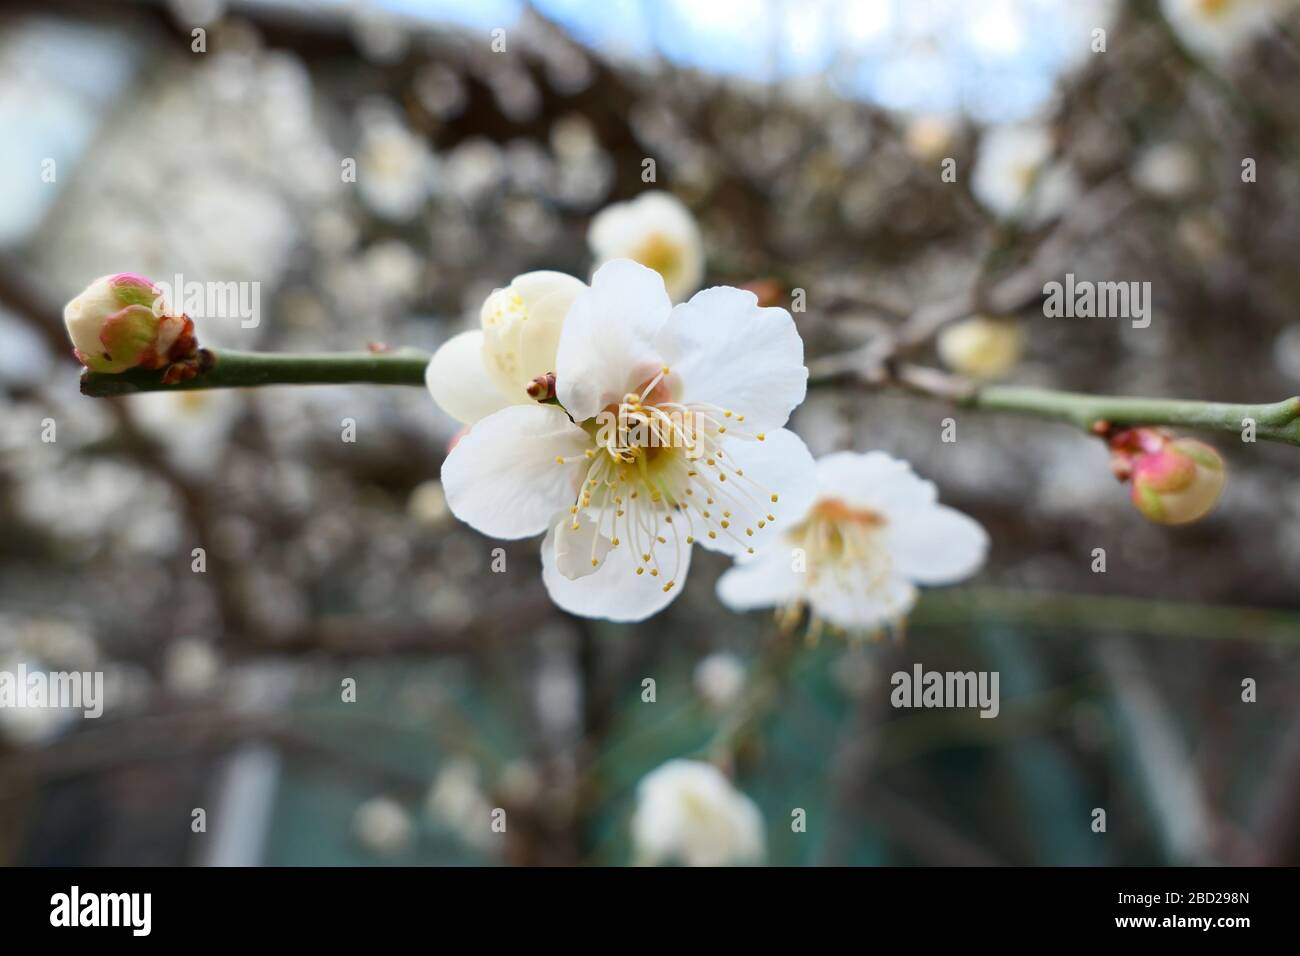 Macro Photography Of Japanese Apricot Flower In The Springtime Stock Photo Alamy